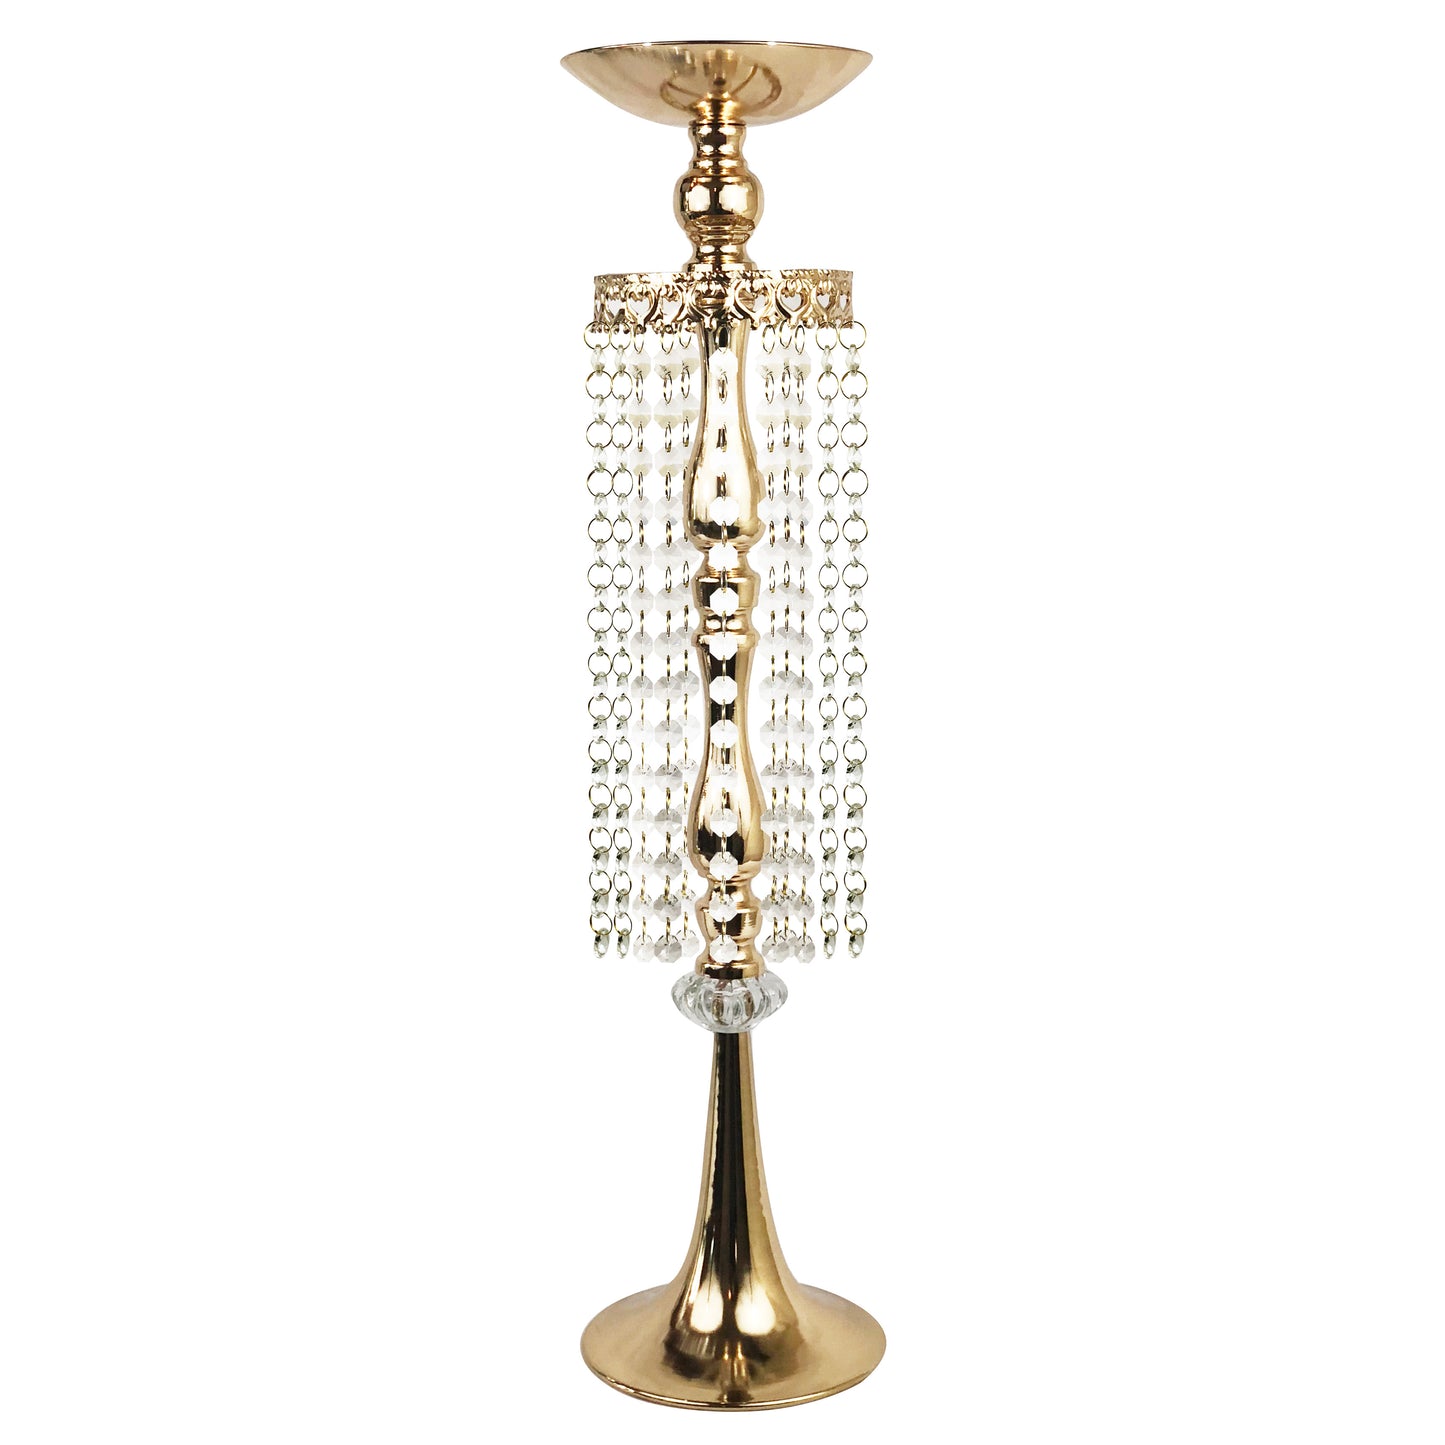 Allgala 25" Gold Plated Flower Stand with Crystal Beads Strand